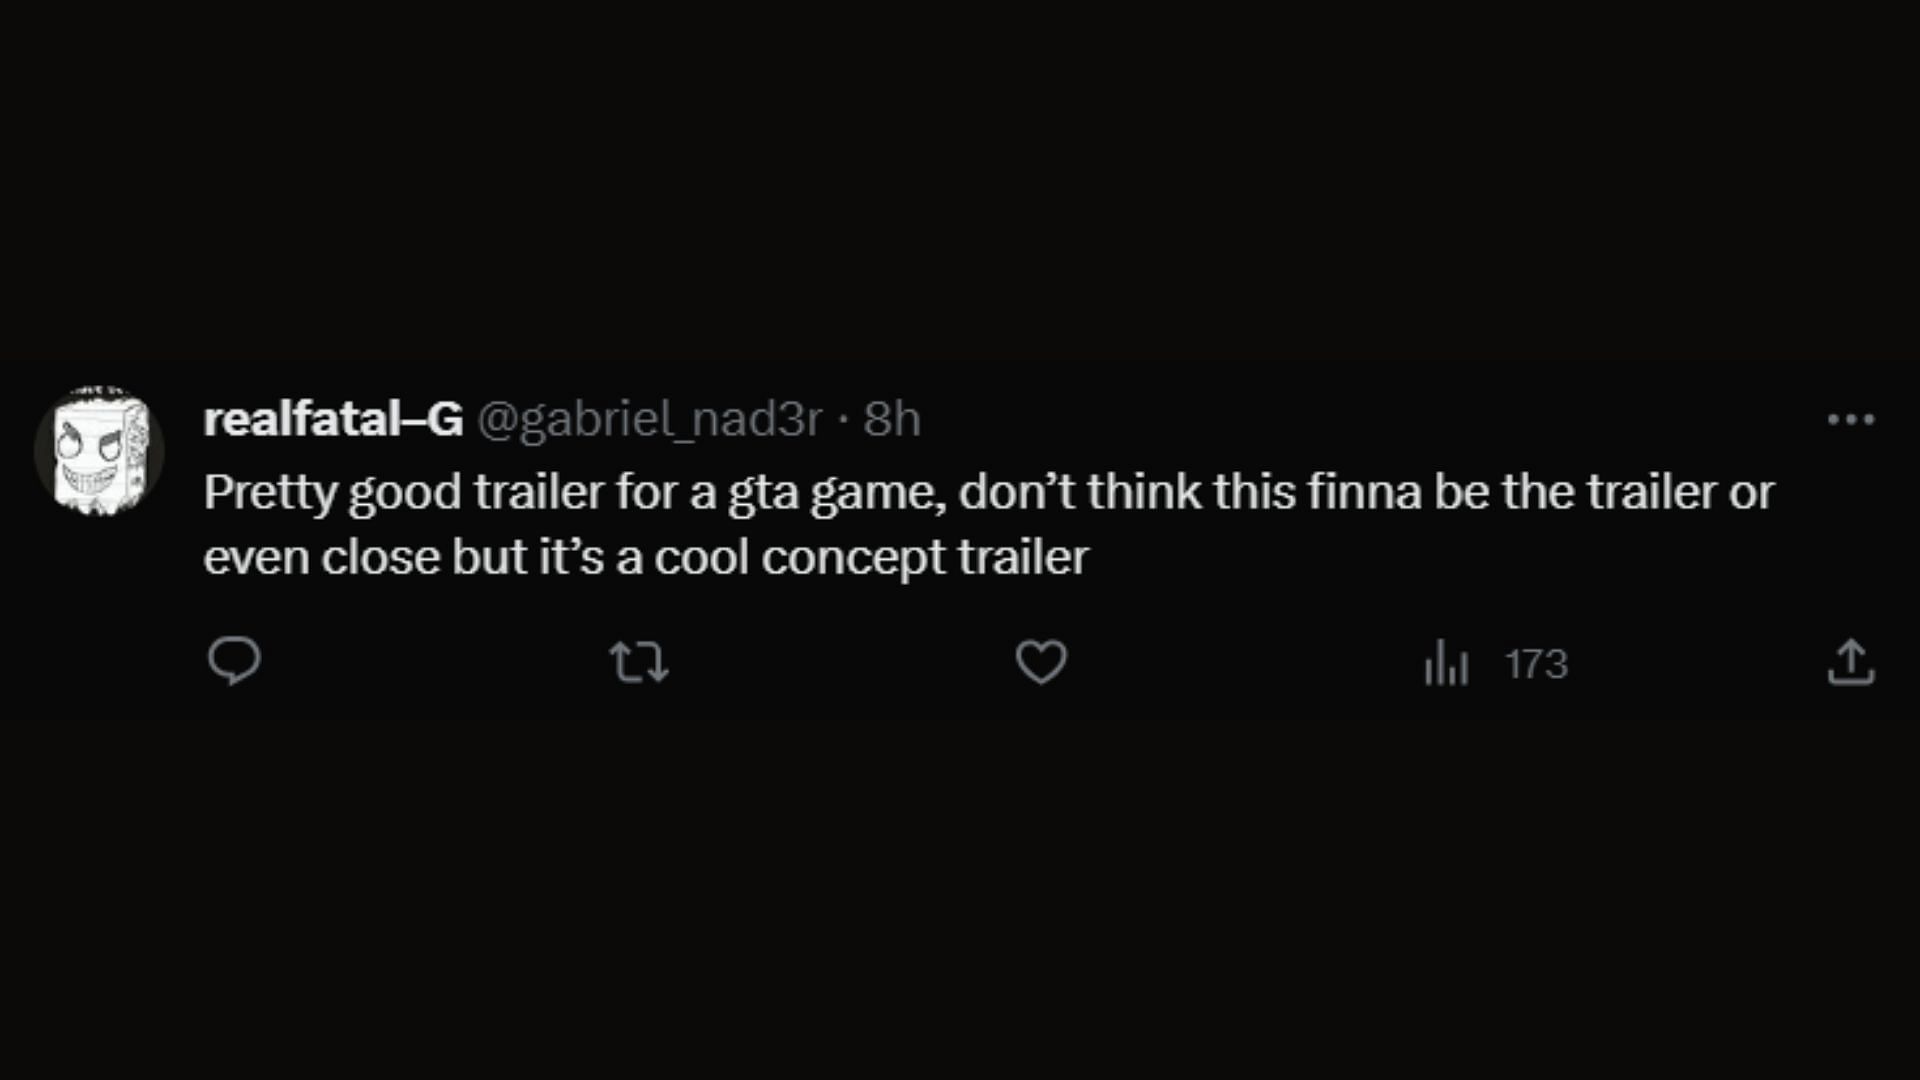 realfatal&ndash;G&rsquo;s (X/@gabriel_nad3r) comment on the Grand Theft Auto 6 concept video. (Image via Sportskeeda)